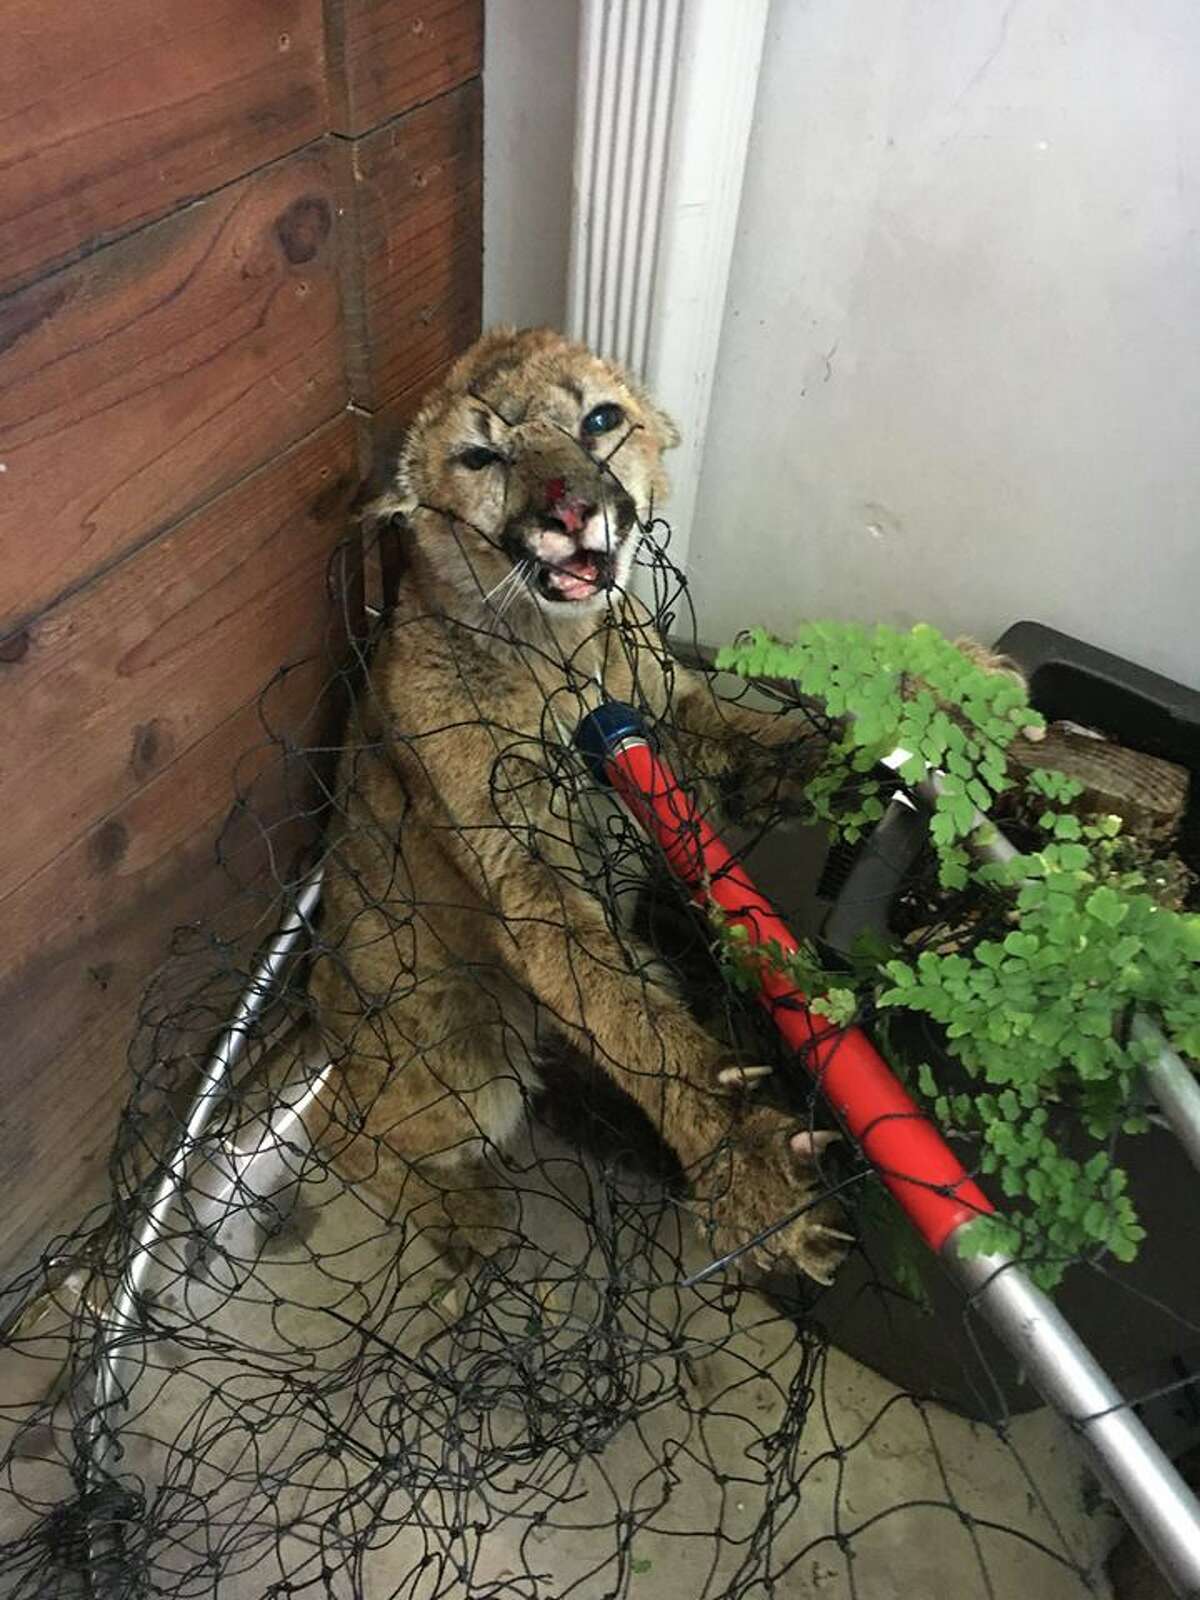 A pair of mountain lion cubs were spotted and rescued in Half Moon Bay on Tuesday. They were found to be dehydrated and malnourished and are currently being treated by the Oakland Zoo.